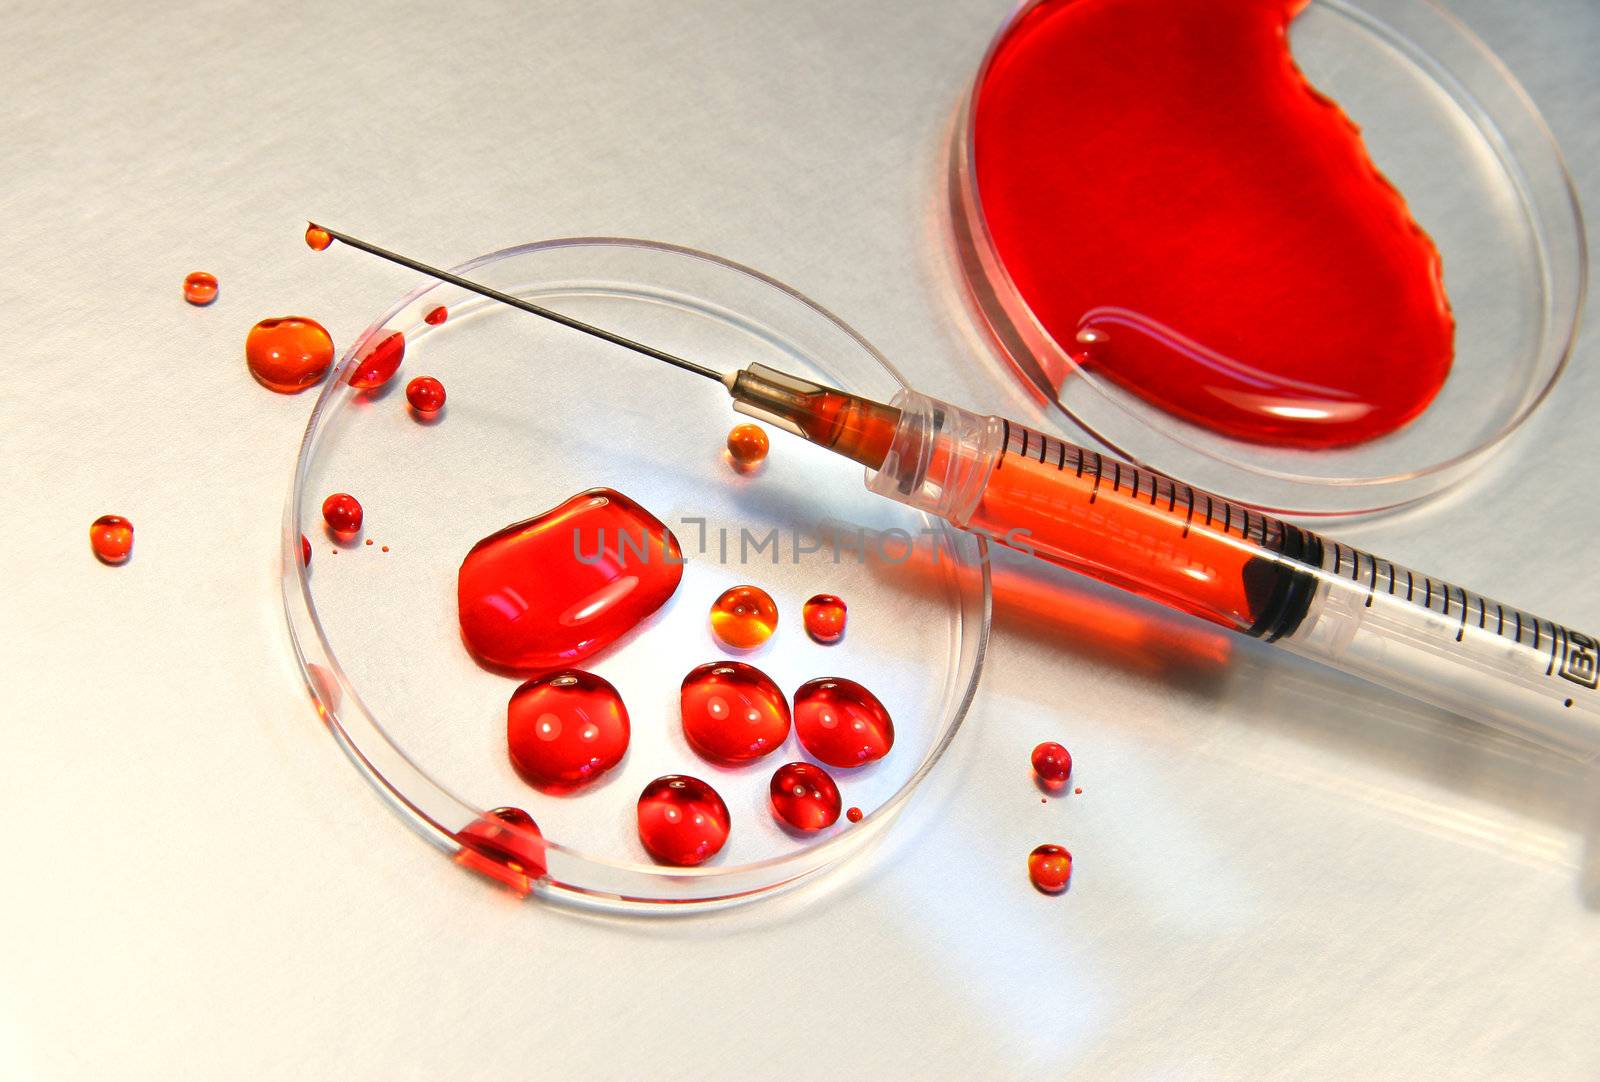 Blood in petri dish with syringe